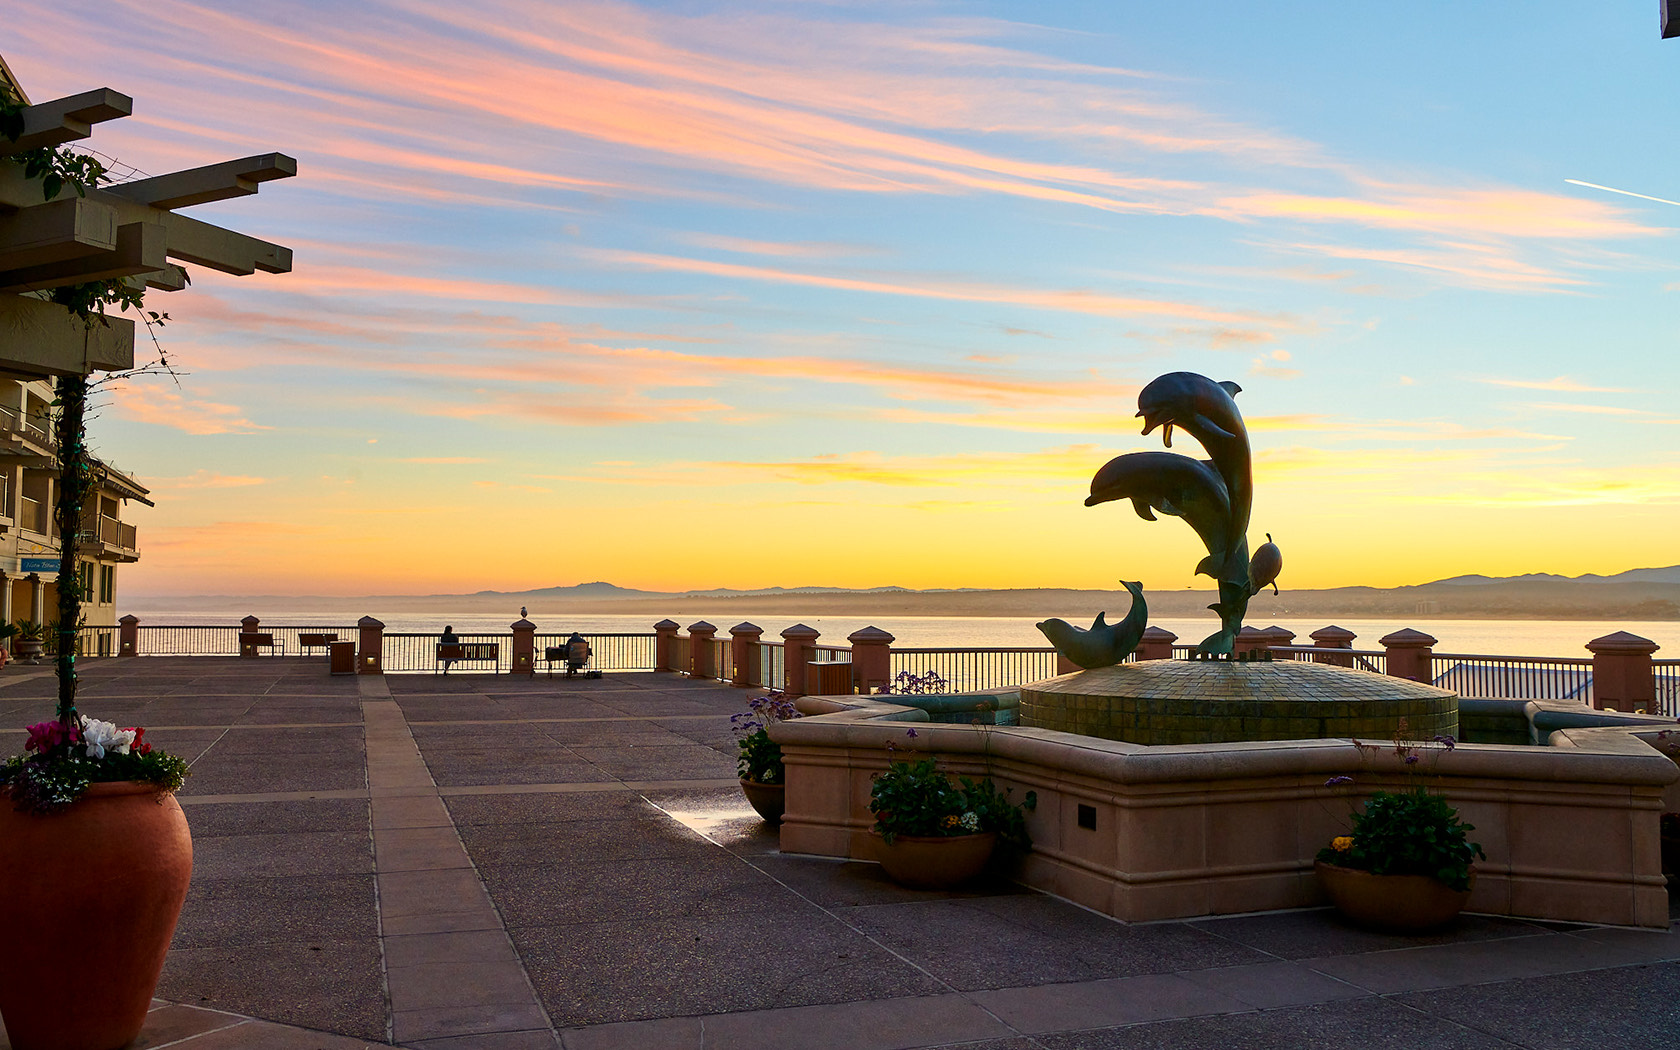 A lovely sunset from the Monterey Plaza terrace